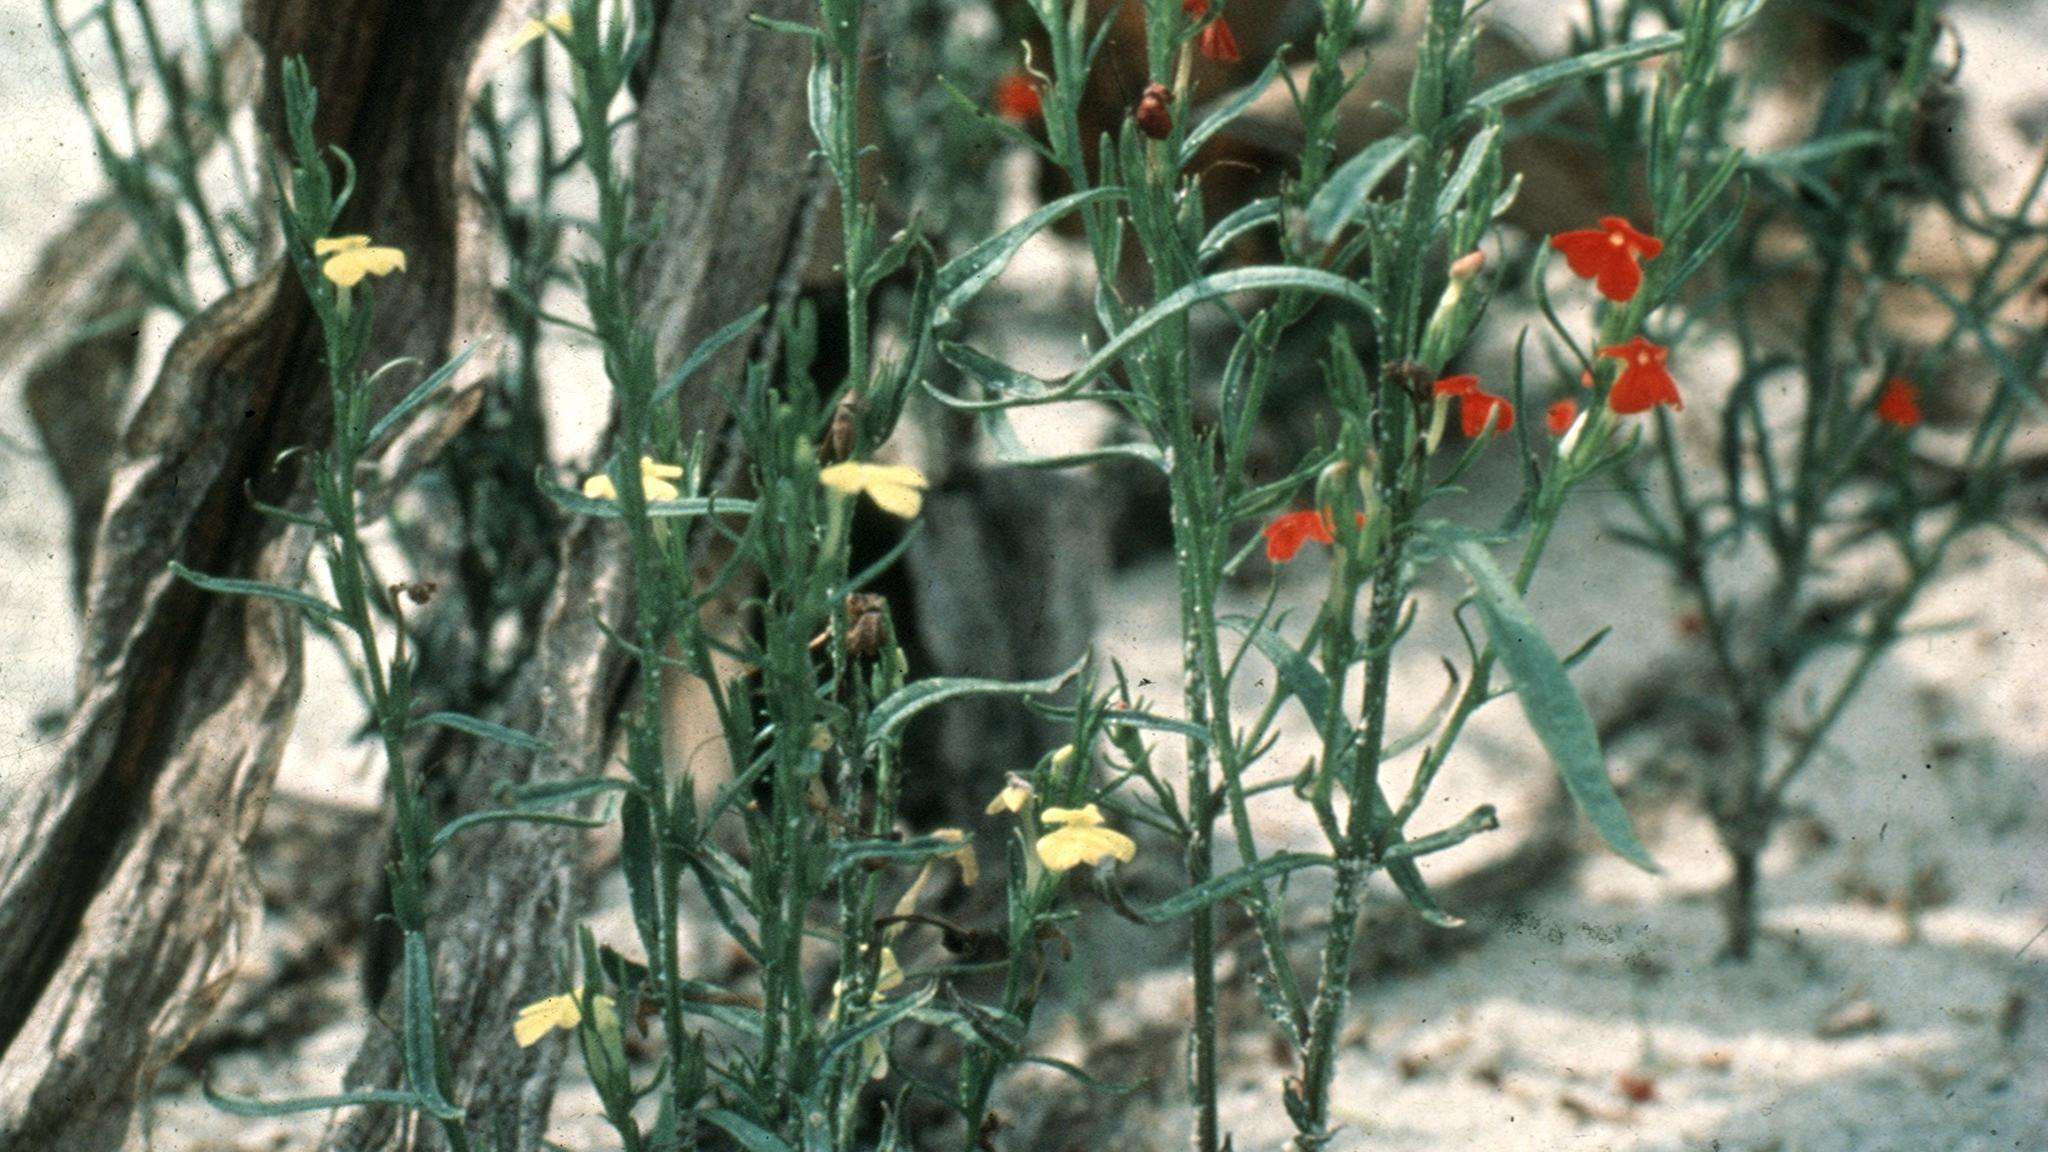 Green stem weeds with red or yellow flowers.